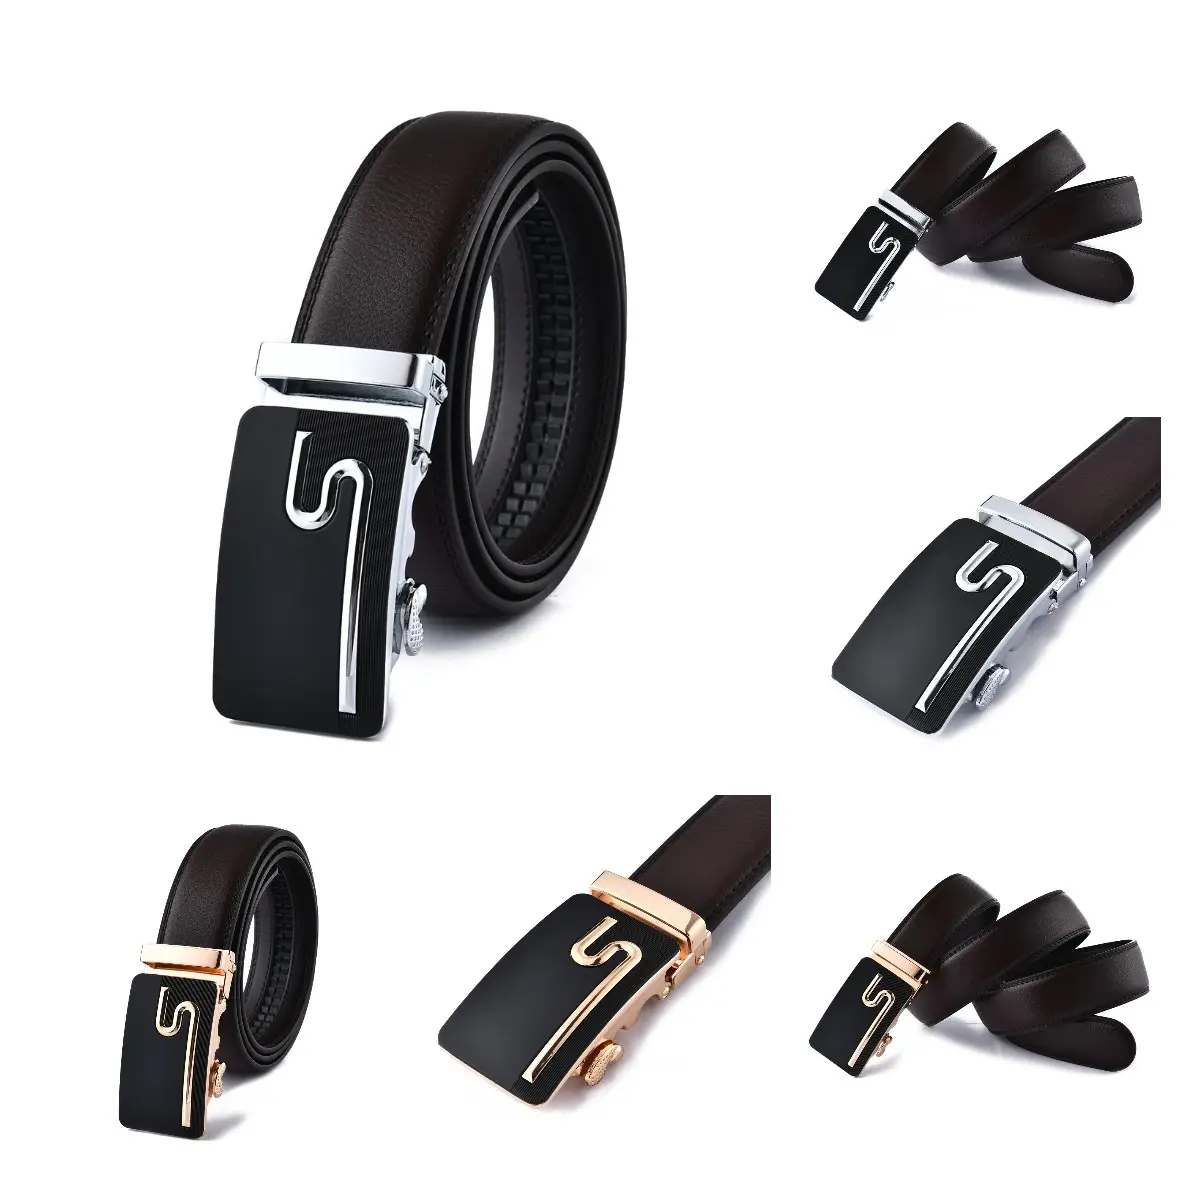 High Quality Leather Belts Free Shipping Men's Gifts Unisex Fashion Men's Belts Automatic Buckle